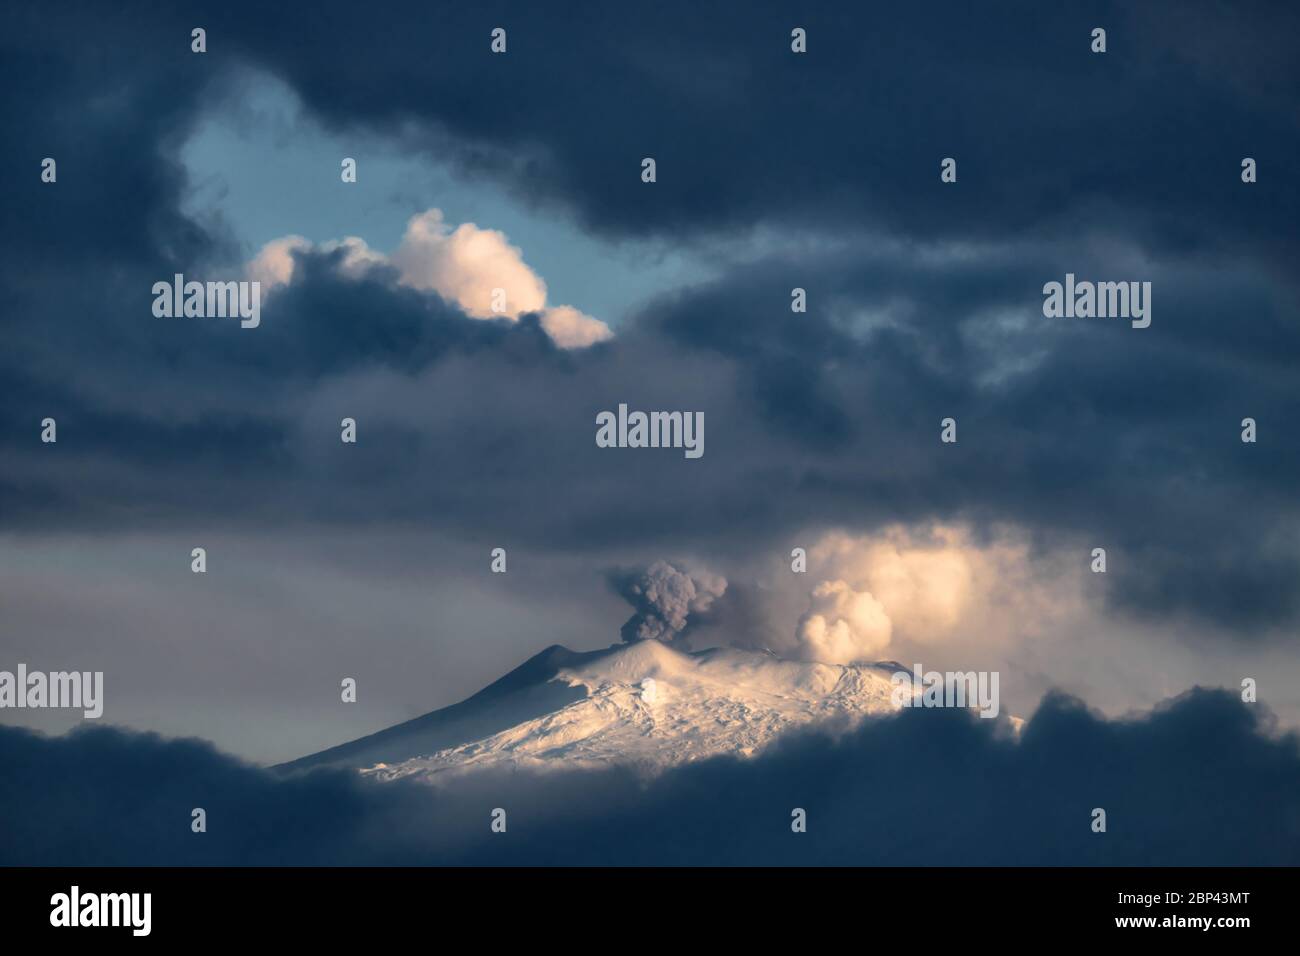 snow covered Etna Mountain emit smoke from central crater framed by stormy low clouds; the volcano is a natural landmark of Sicily Stock Photo